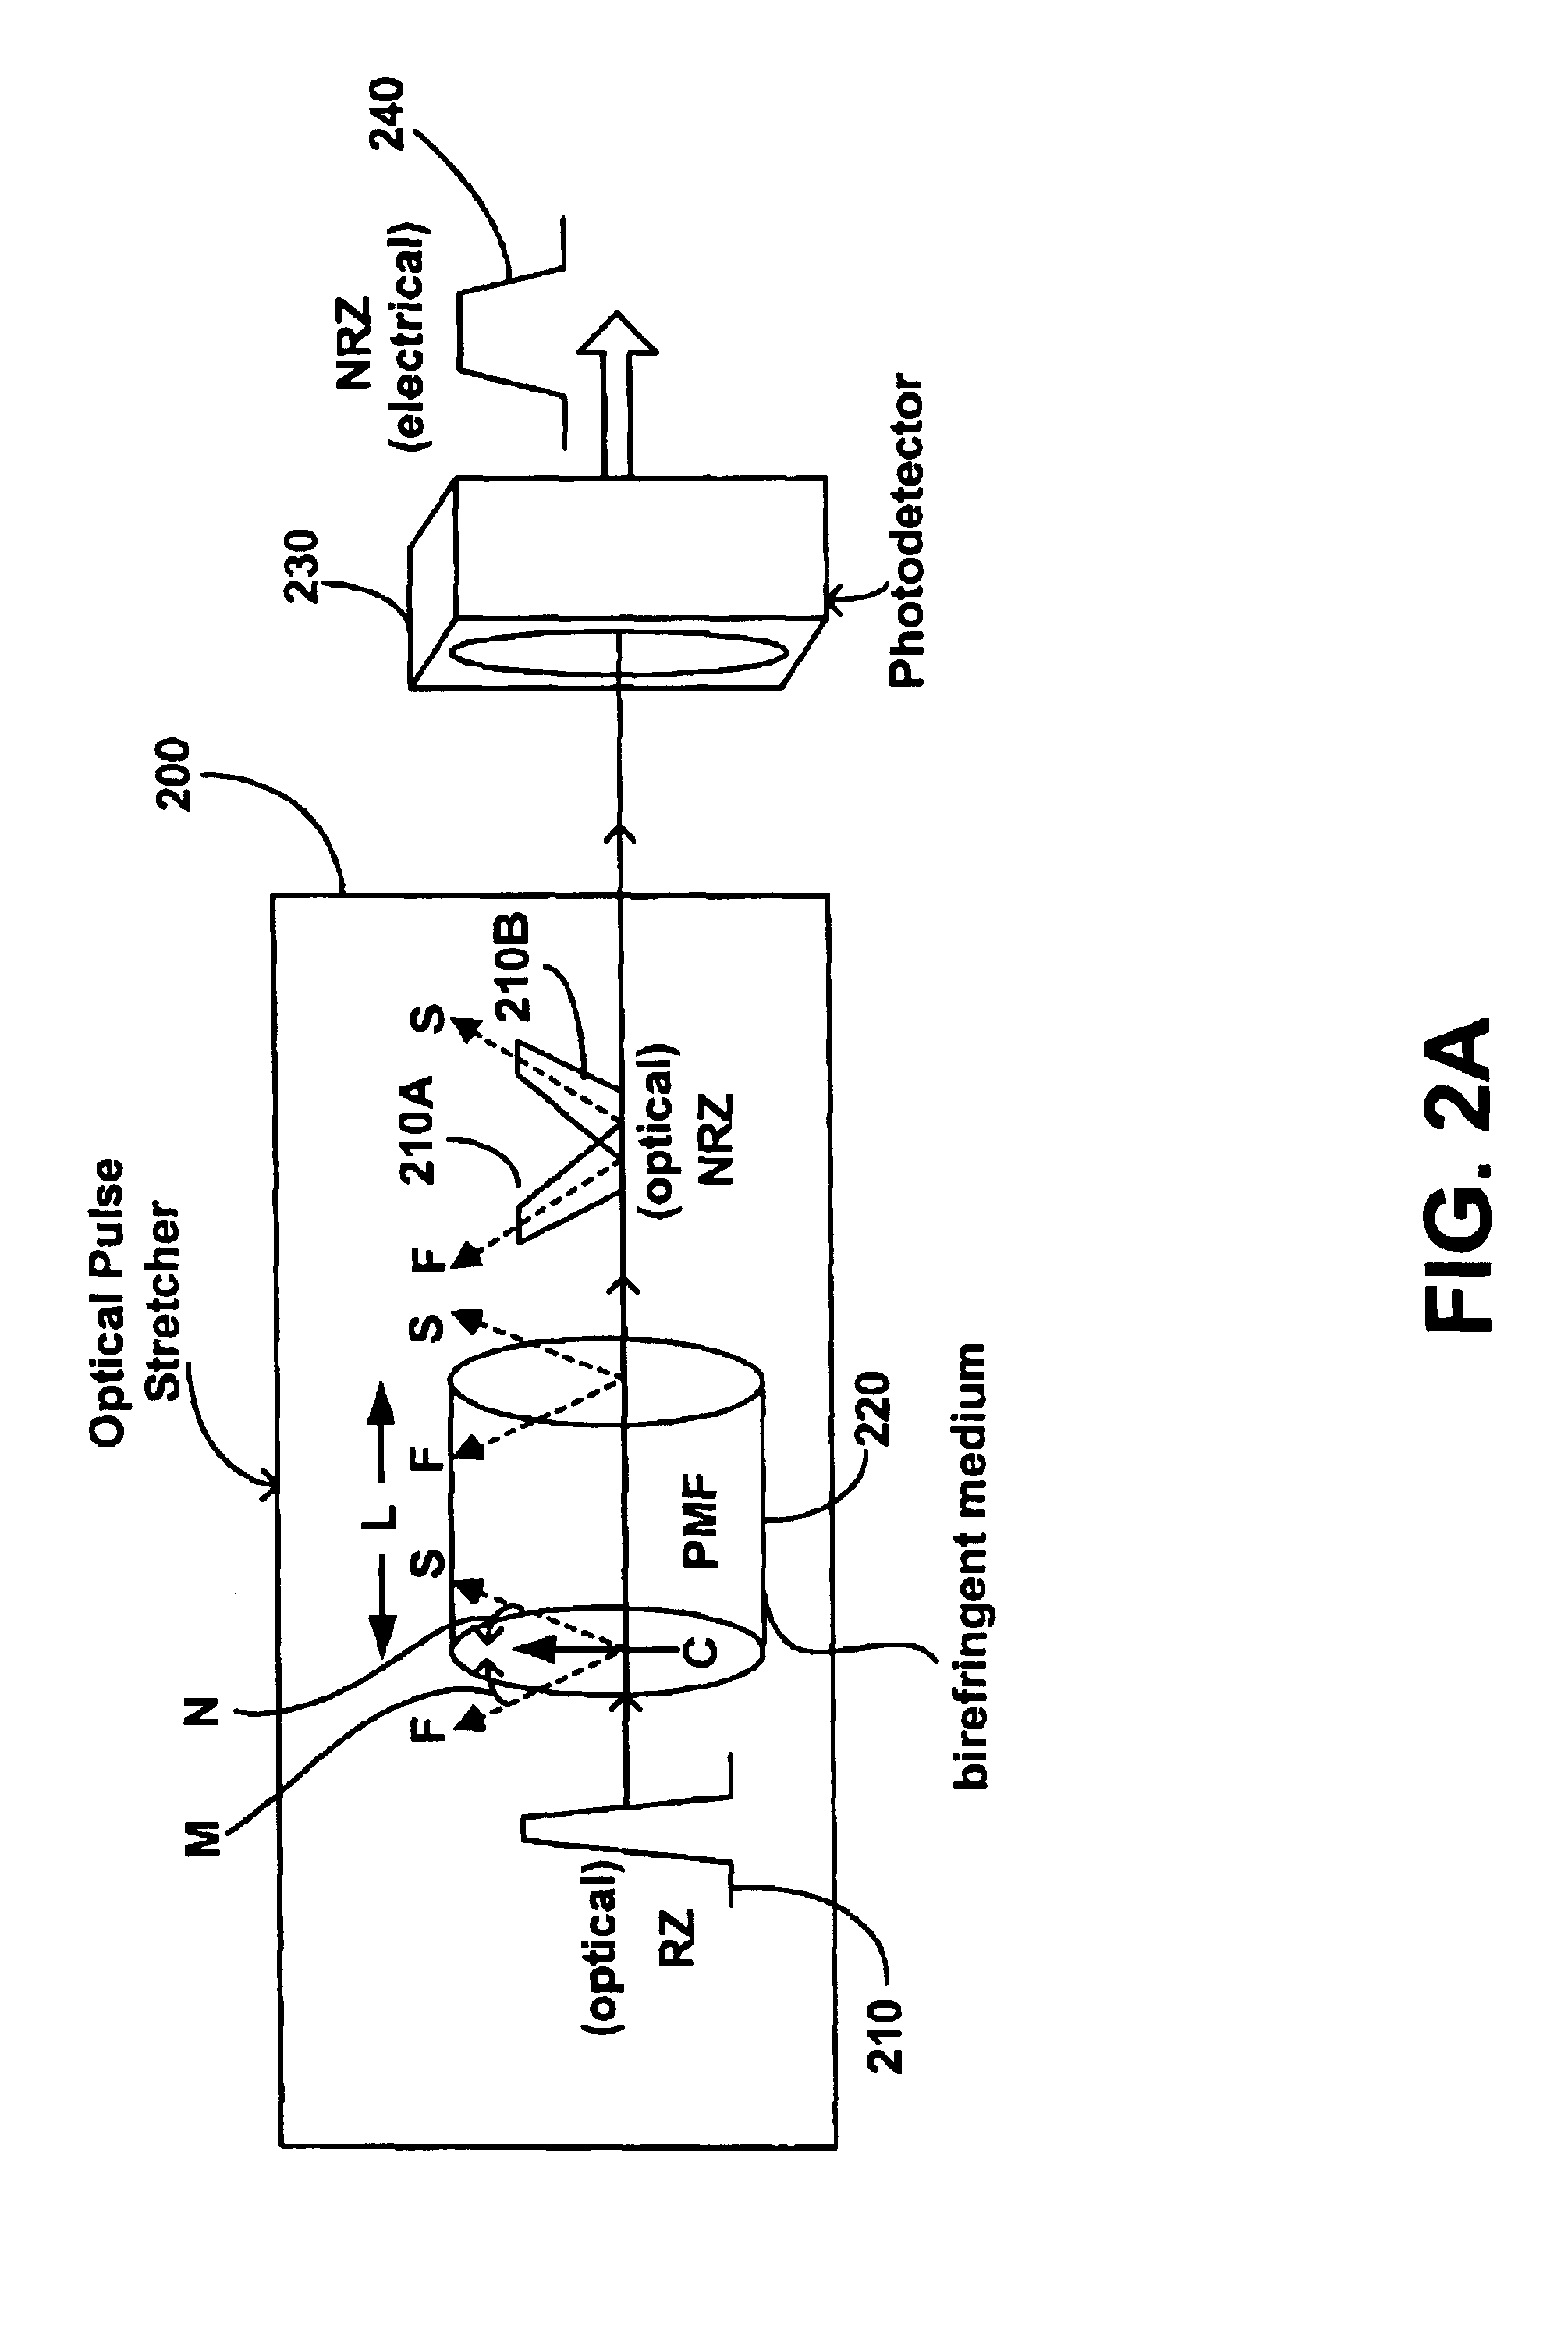 Method and system for generating low jitter NRZ optical data utilizing an optical pulse stretcher